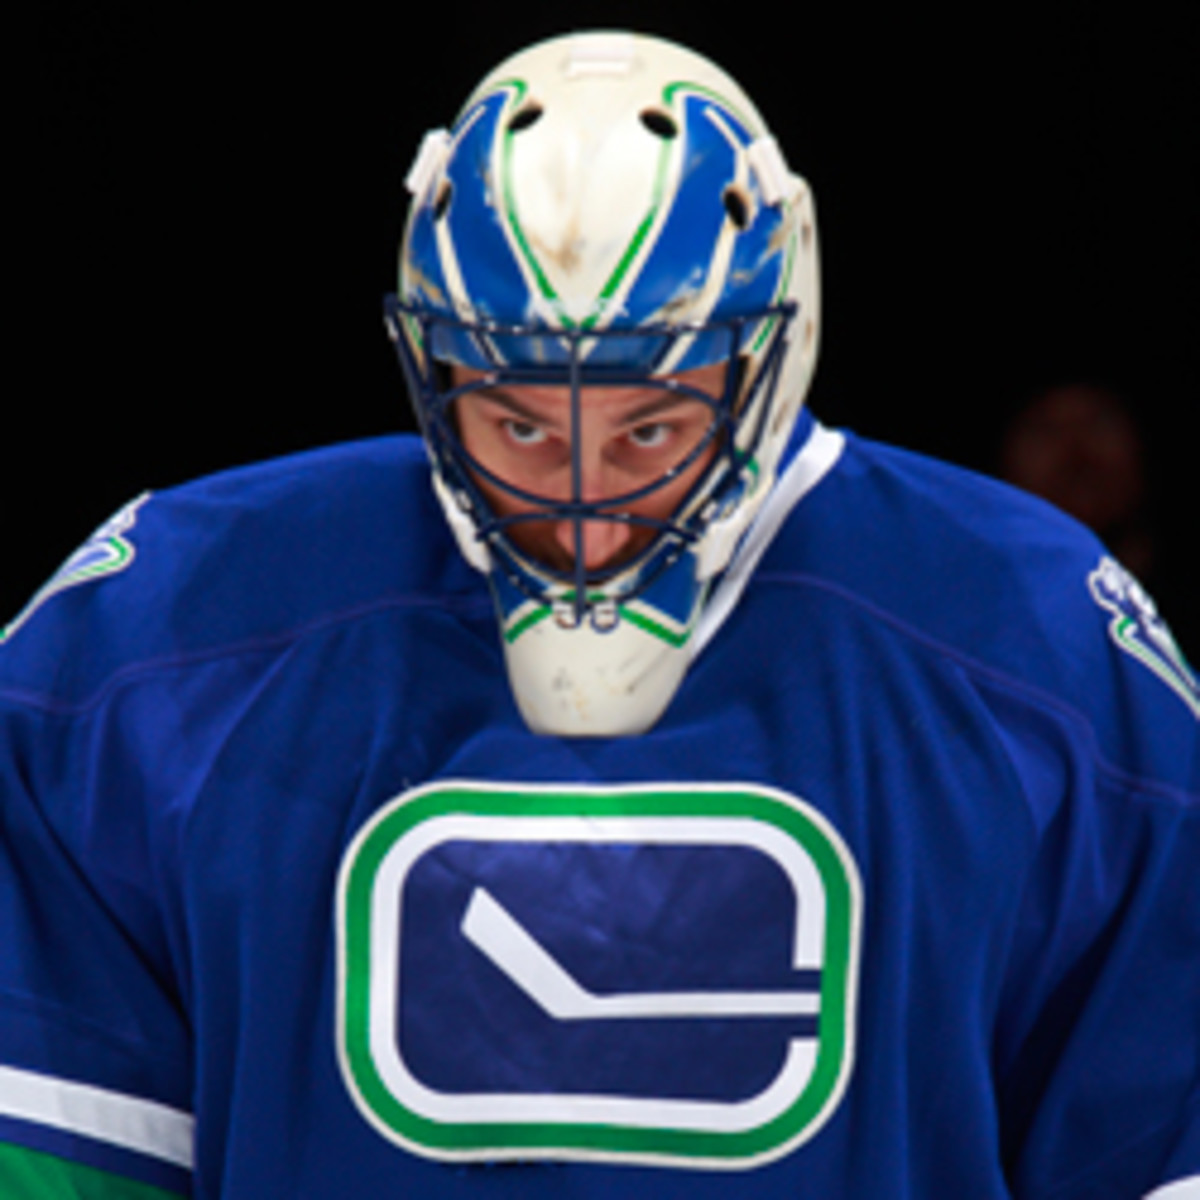 Roberto Luongo has been linked to the Maple Leafs and Panthers in trade scenarios. (Jeff Vinnick/Getty Images)